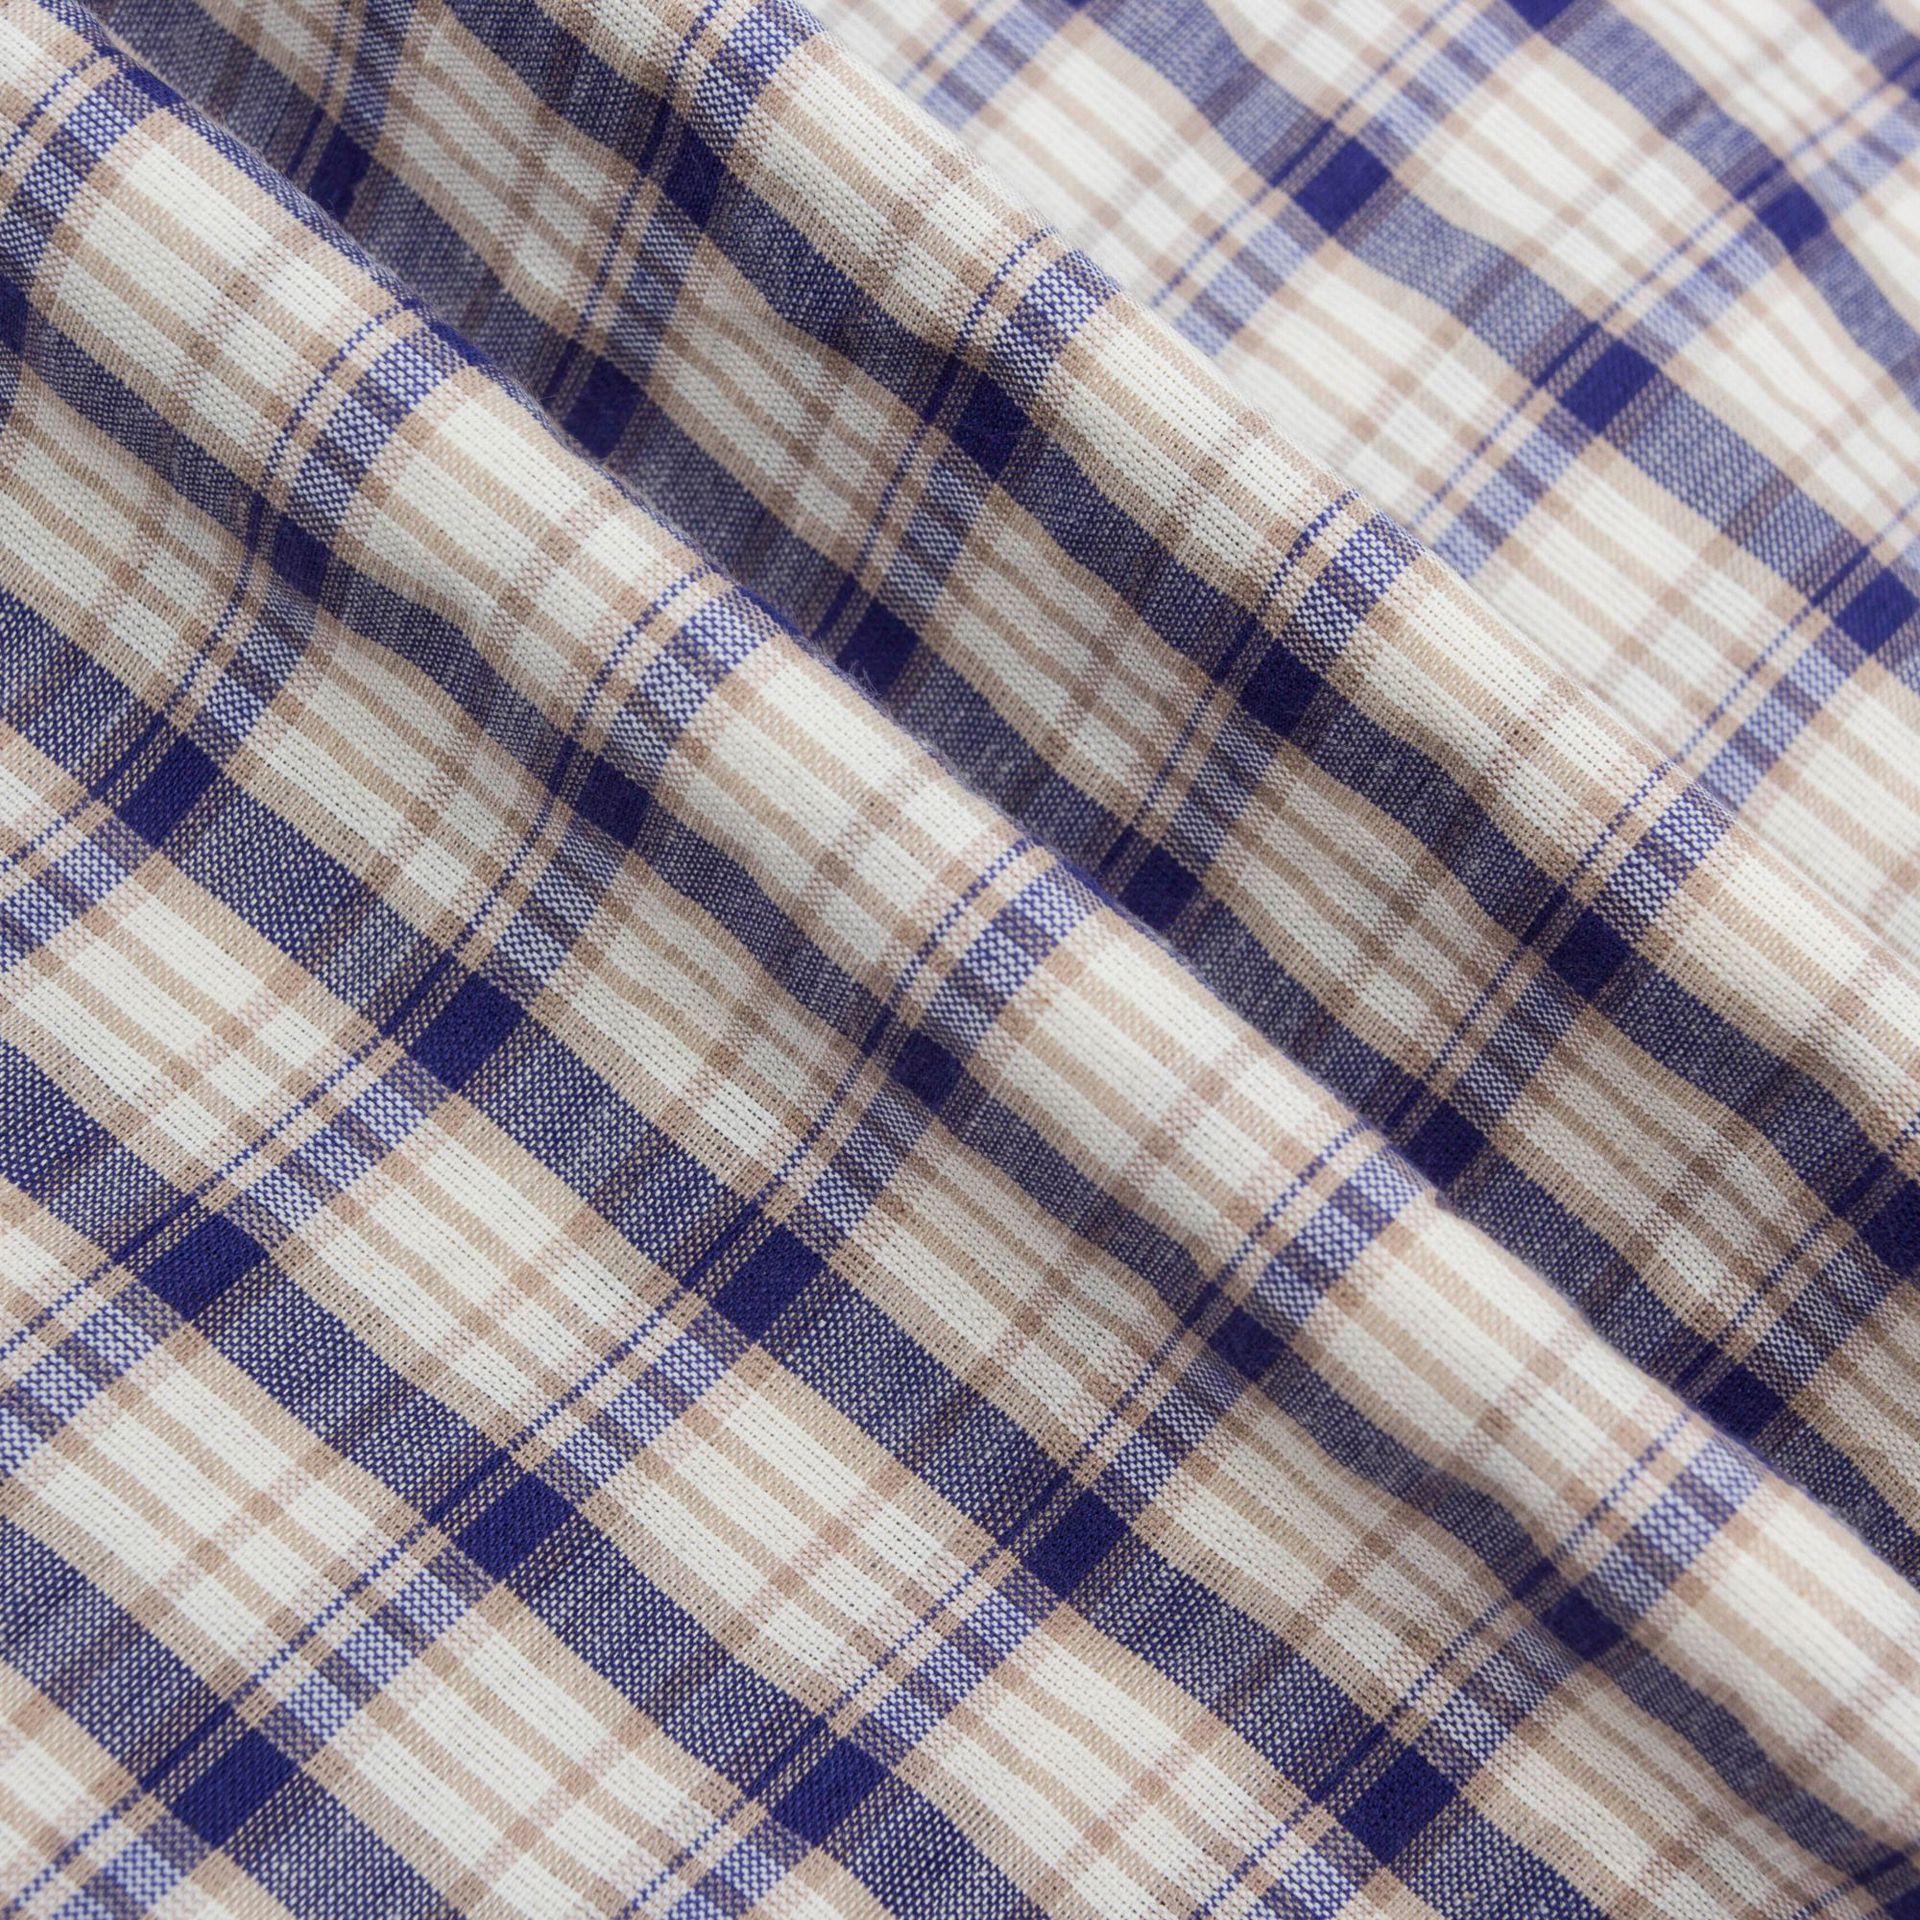 Polyester Cotton Yarn-Dyed Shirt's Fabric Plaid Clothing Fabric Can Be Sample Production and Processing Price Can Be Discussed